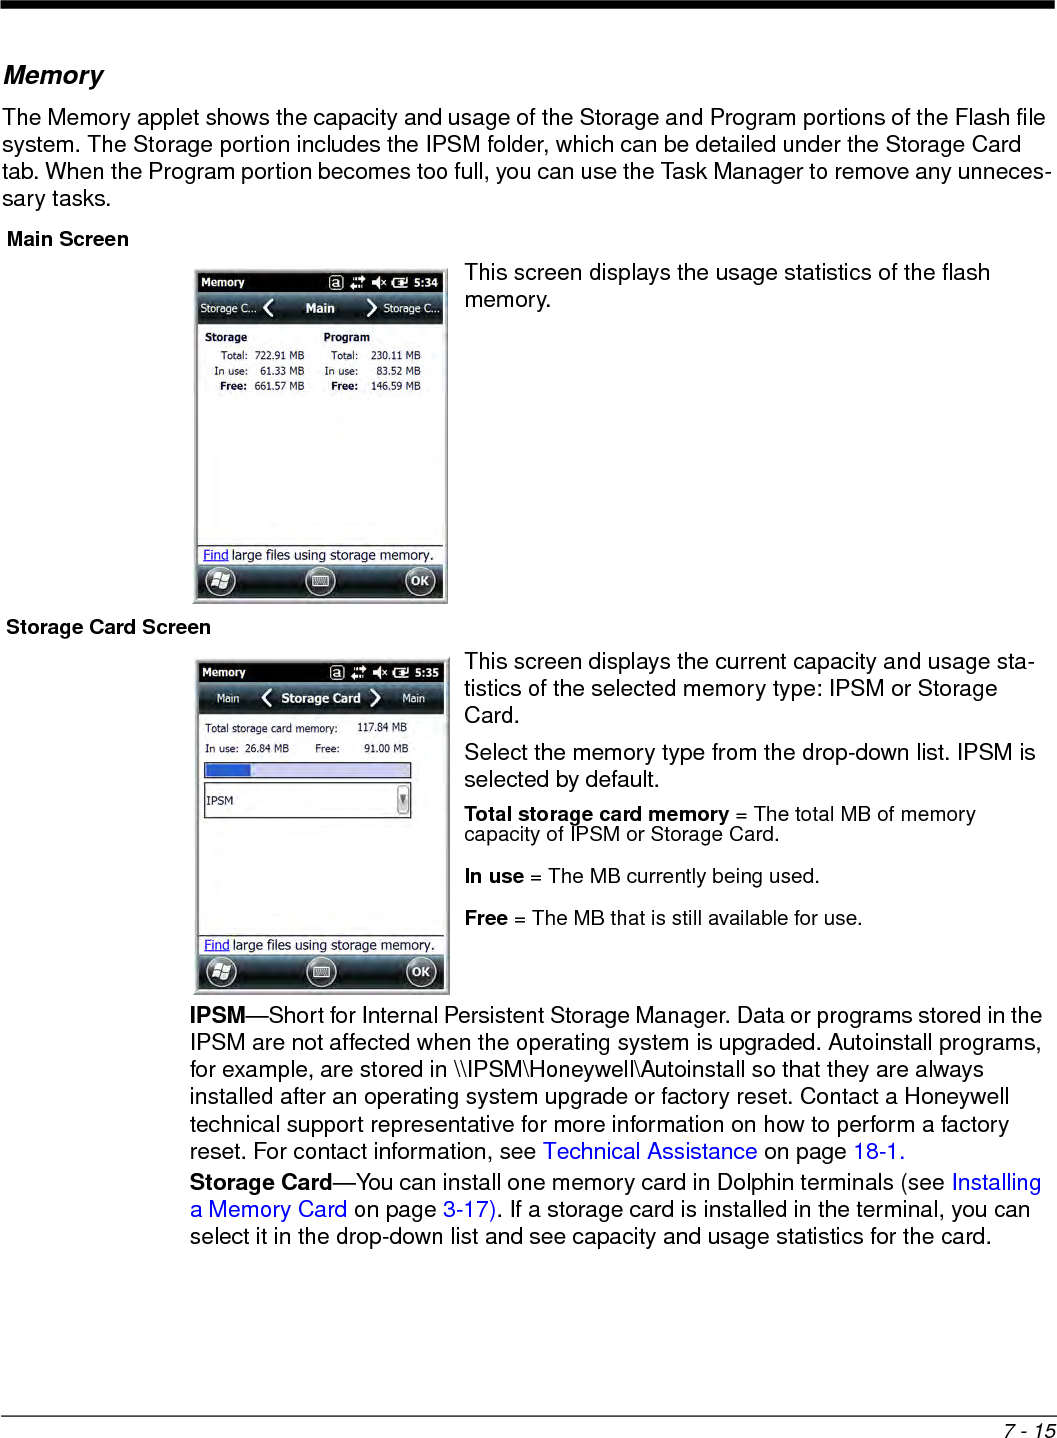 7 - 15MemoryThe Memory applet shows the capacity and usage of the Storage and Program portions of the Flash file system. The Storage portion includes the IPSM folder, which can be detailed under the Storage Card tab. When the Program portion becomes too full, you can use the Task Manager to remove any unneces-sary tasks. Main ScreenThis screen displays the usage statistics of the flash memory. Storage Card ScreenThis screen displays the current capacity and usage sta-tistics of the selected memory type: IPSM or Storage Card. Select the memory type from the drop-down list. IPSM is selected by default. Total storage card memory = The total MB of memory capacity of IPSM or Storage Card.In use = The MB currently being used.Free = The MB that is still available for use. IPSM—Short for Internal Persistent Storage Manager. Data or programs stored in the IPSM are not affected when the operating system is upgraded. Autoinstall programs, for example, are stored in \\IPSM\Honeywell\Autoinstall so that they are always installed after an operating system upgrade or factory reset. Contact a Honeywell technical support representative for more information on how to perform a factory reset. For contact information, see Technical Assistance on page 18-1.Storage Card—You can install one memory card in Dolphin terminals (see Installing a Memory Card on page 3-17). If a storage card is installed in the terminal, you can select it in the drop-down list and see capacity and usage statistics for the card. 